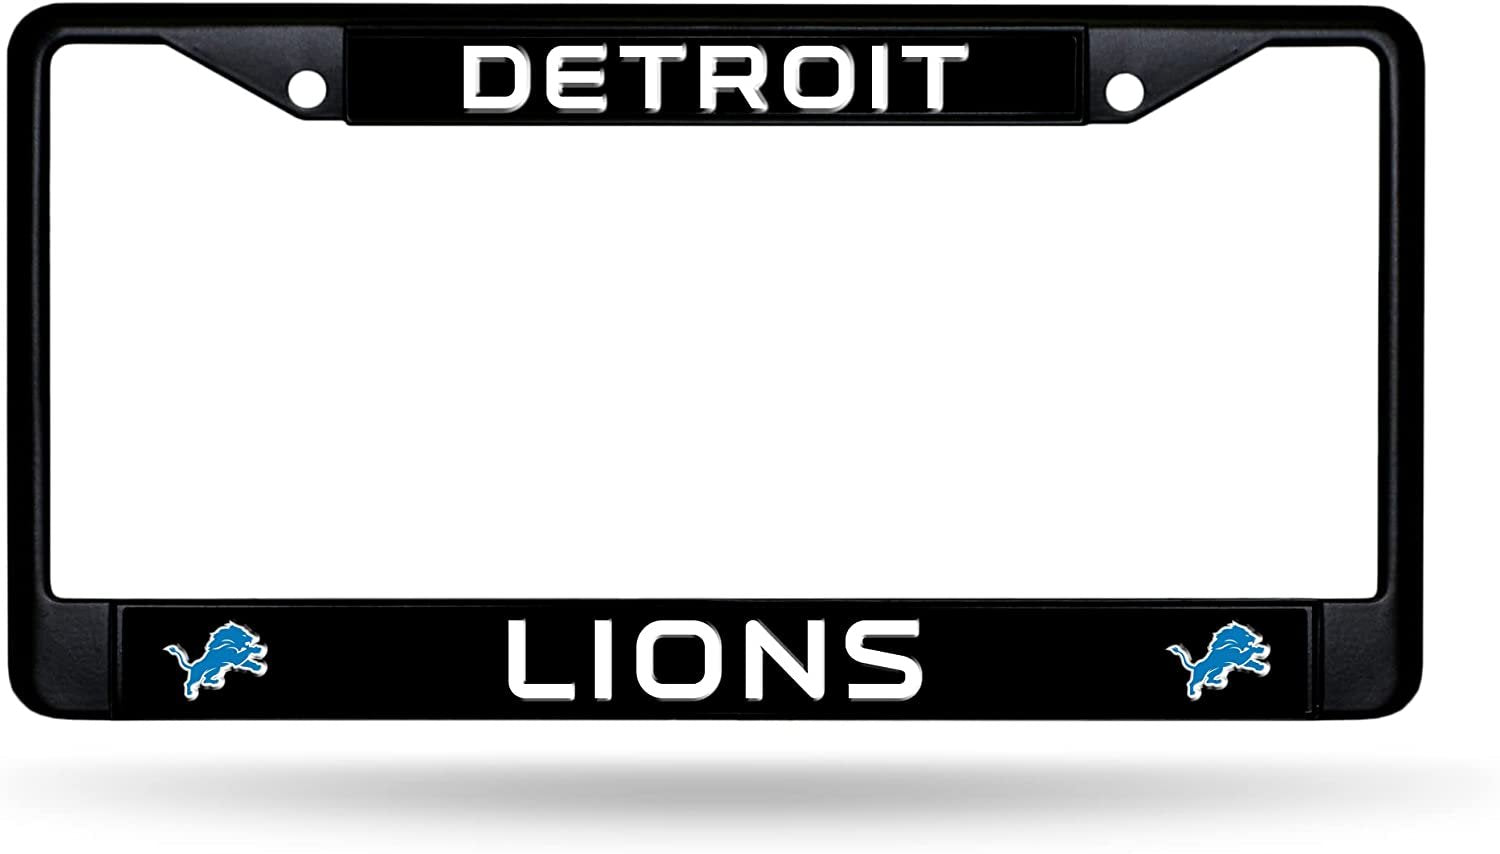 Detroit Lions Black Metal License Plate Frame Chrome Tag Cover 6x12 Inch